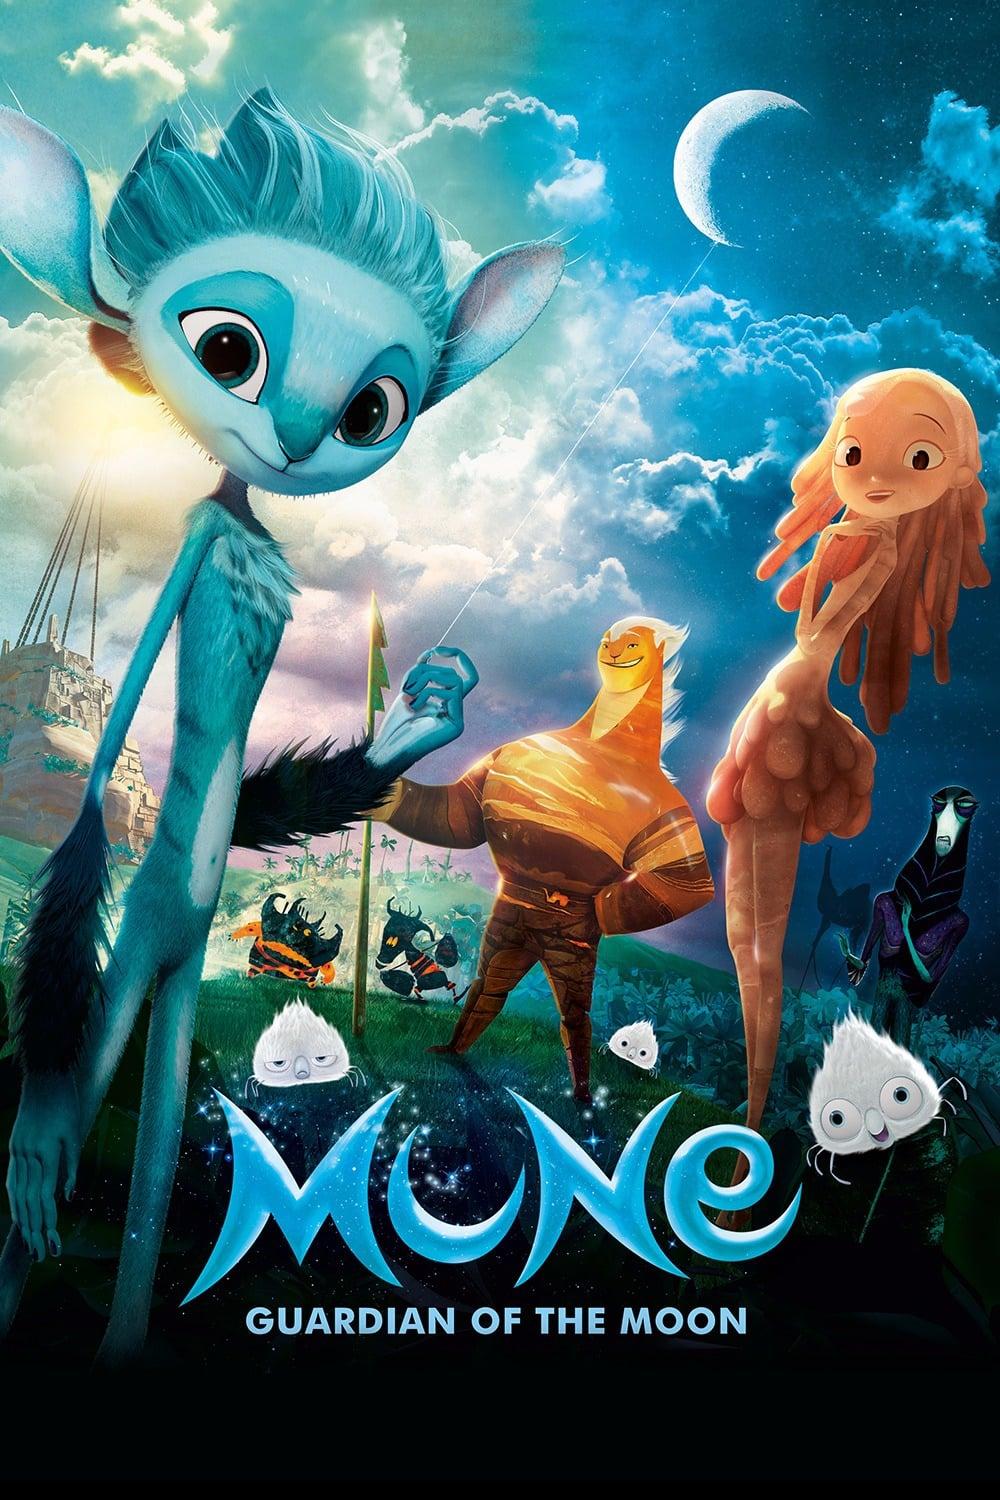 Mune: Guardian of the Moon poster